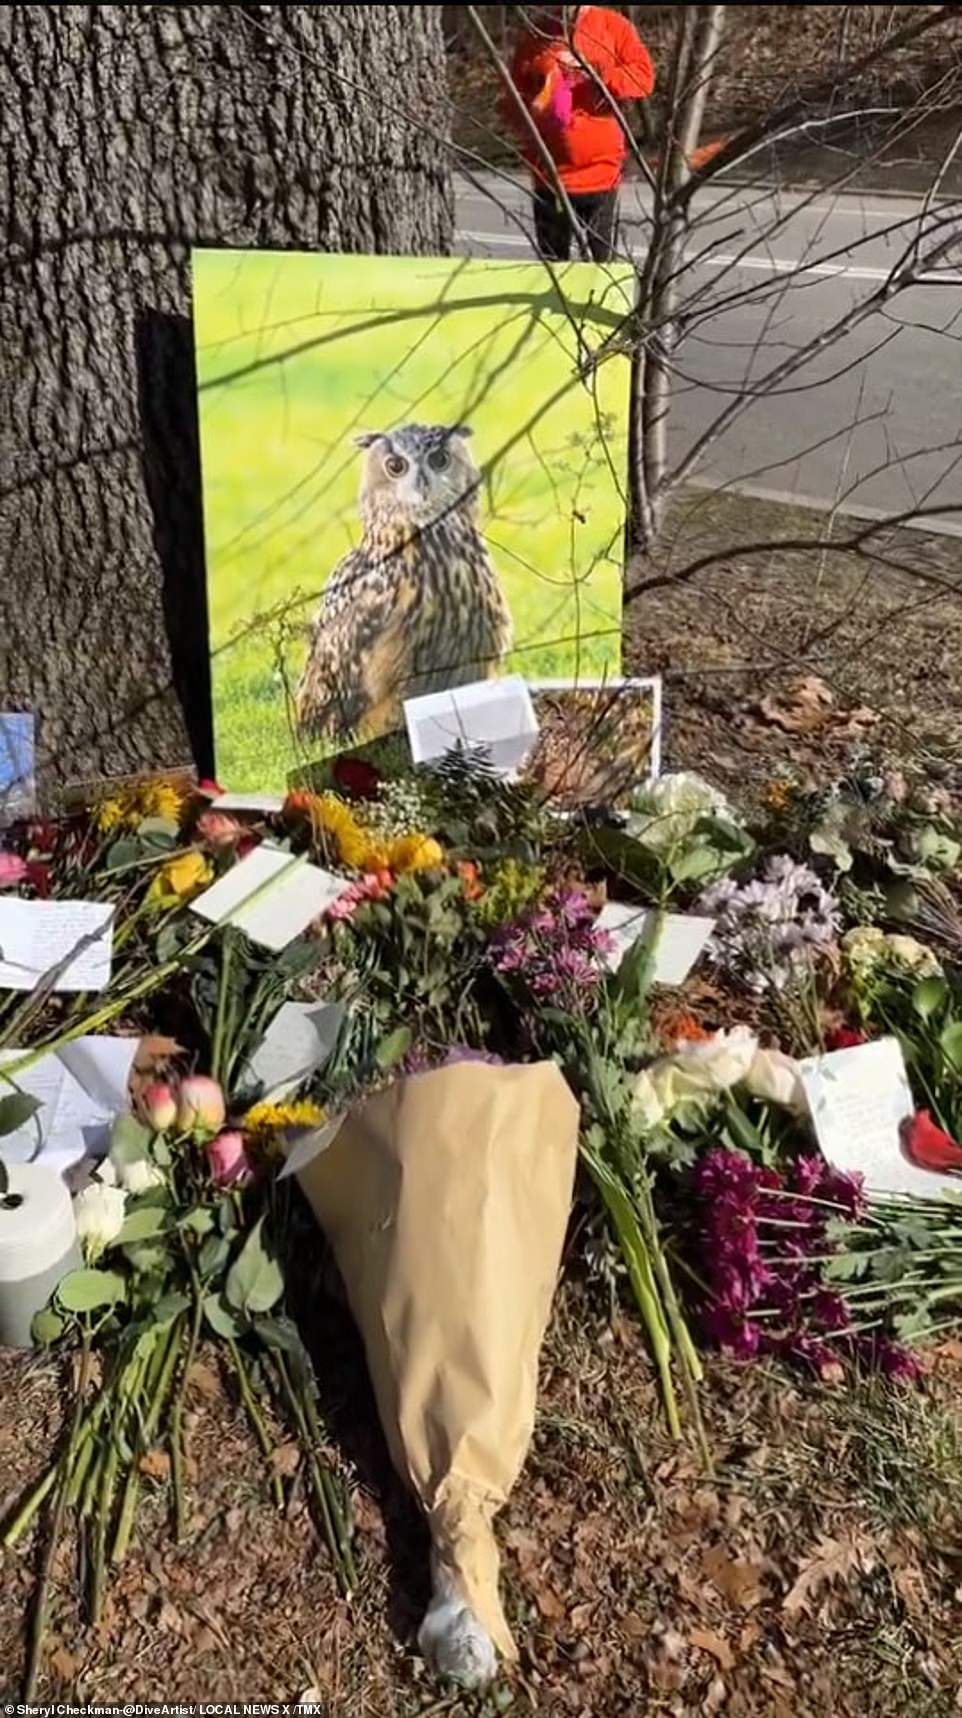 Hundreds of people gathered in Central Park on Sunday to celebrate Skinny Owl, New York City's favorite feathered friend, who tragically died after crashing into a building on the Upper West Side earlier this month.